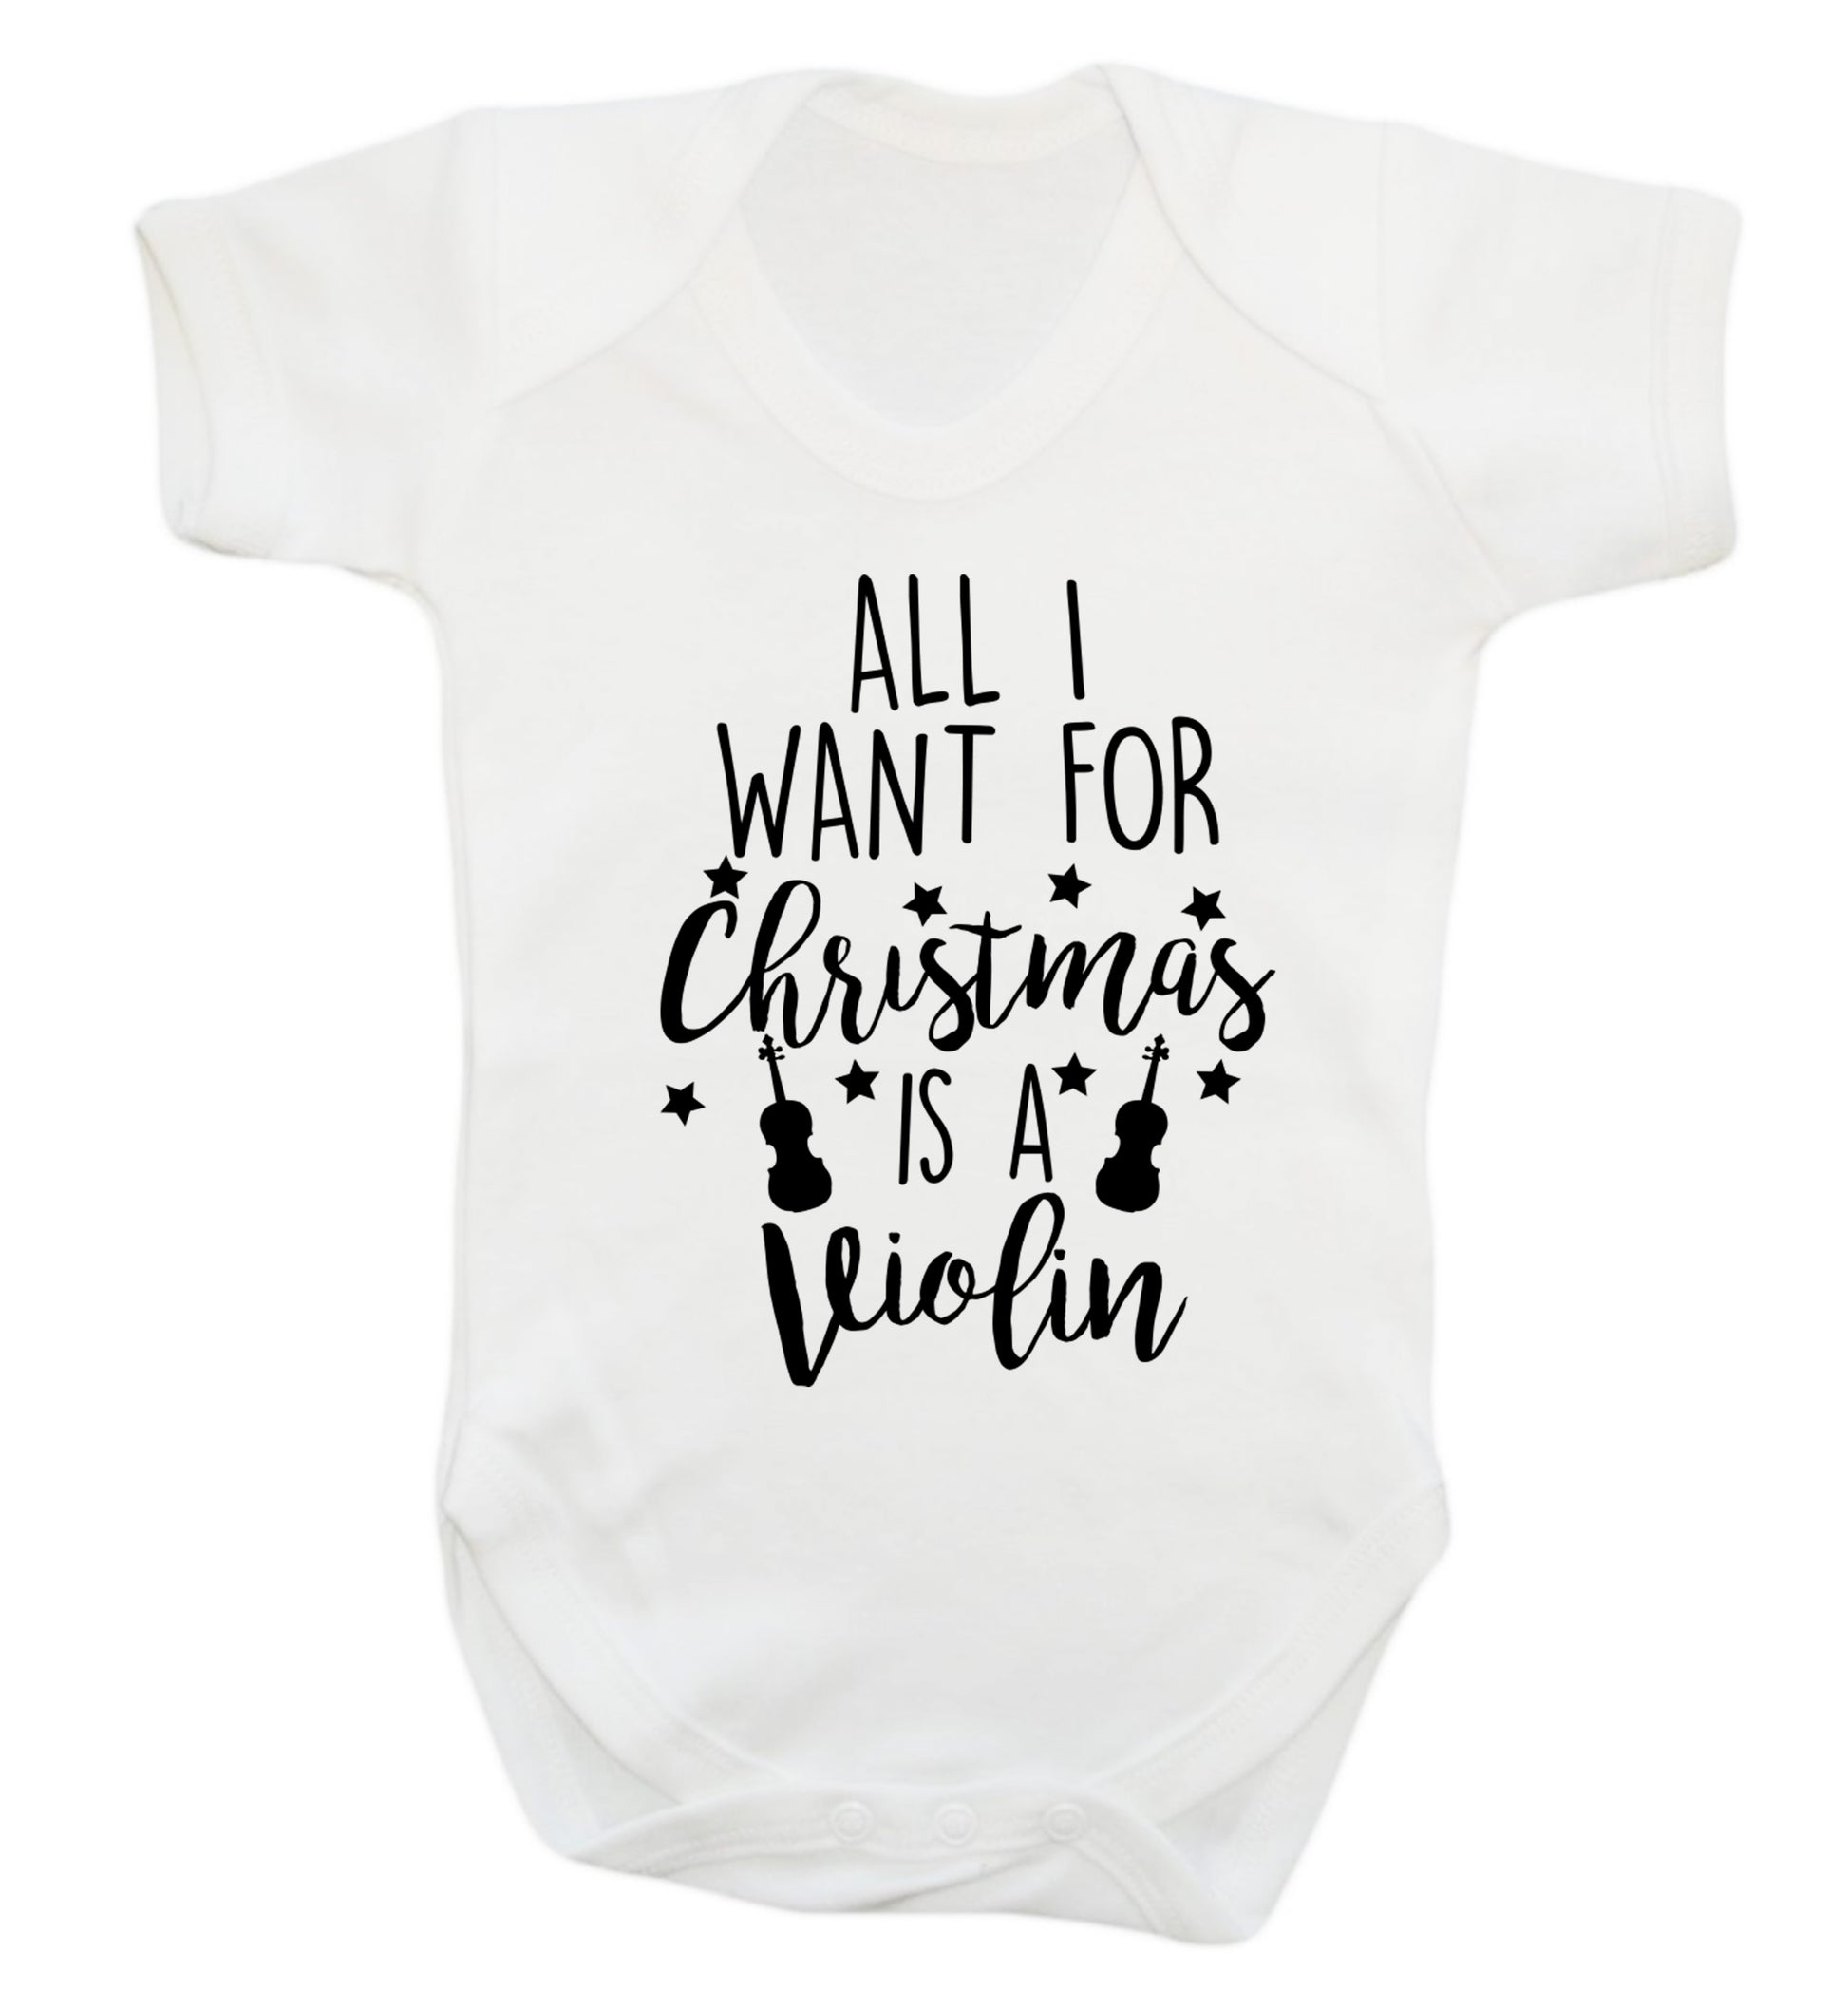 All I Want For Christmas is a Violin Baby Vest white 18-24 months